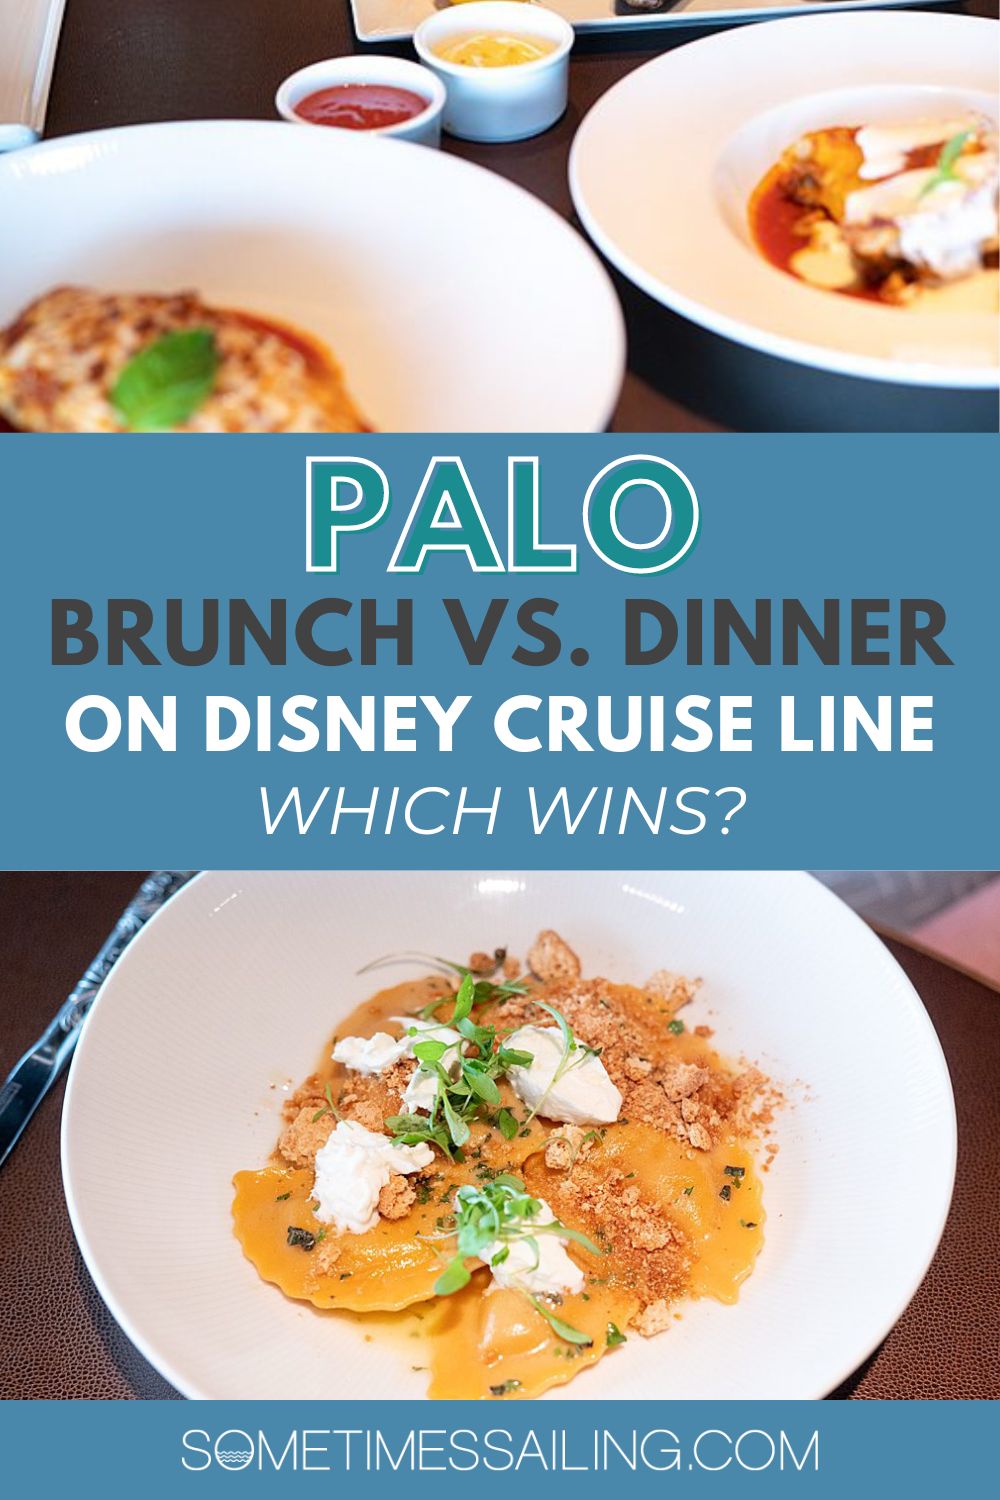 Palo brunch vs. dinner on Disney Cruise Line: Which Wins? With photos of food dishes.